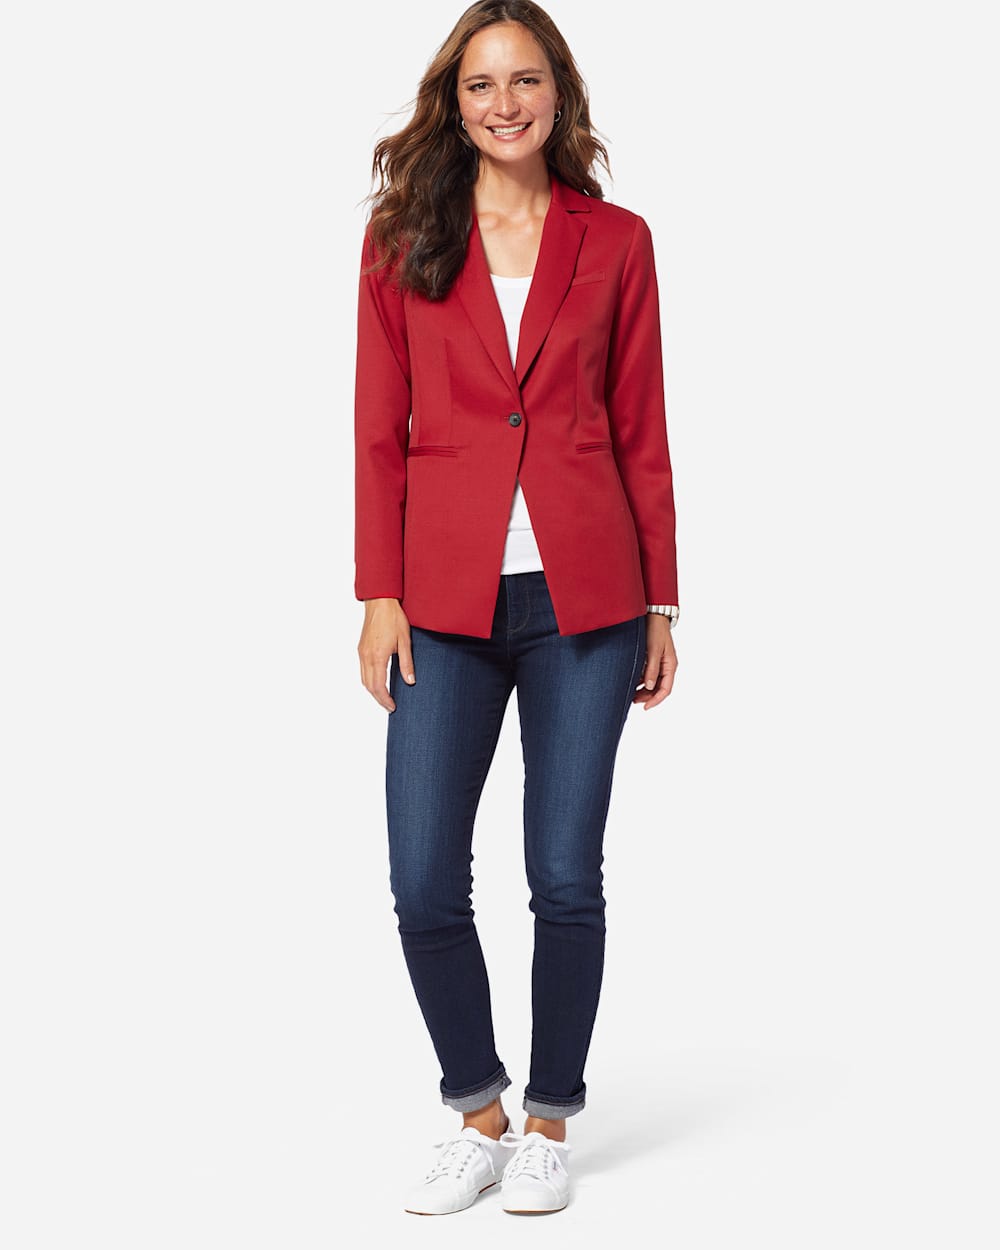 ADDITIONAL VIEW OF WOMEN'S SEASONLESS WOOL BLAZER IN RED ROCK image number 2